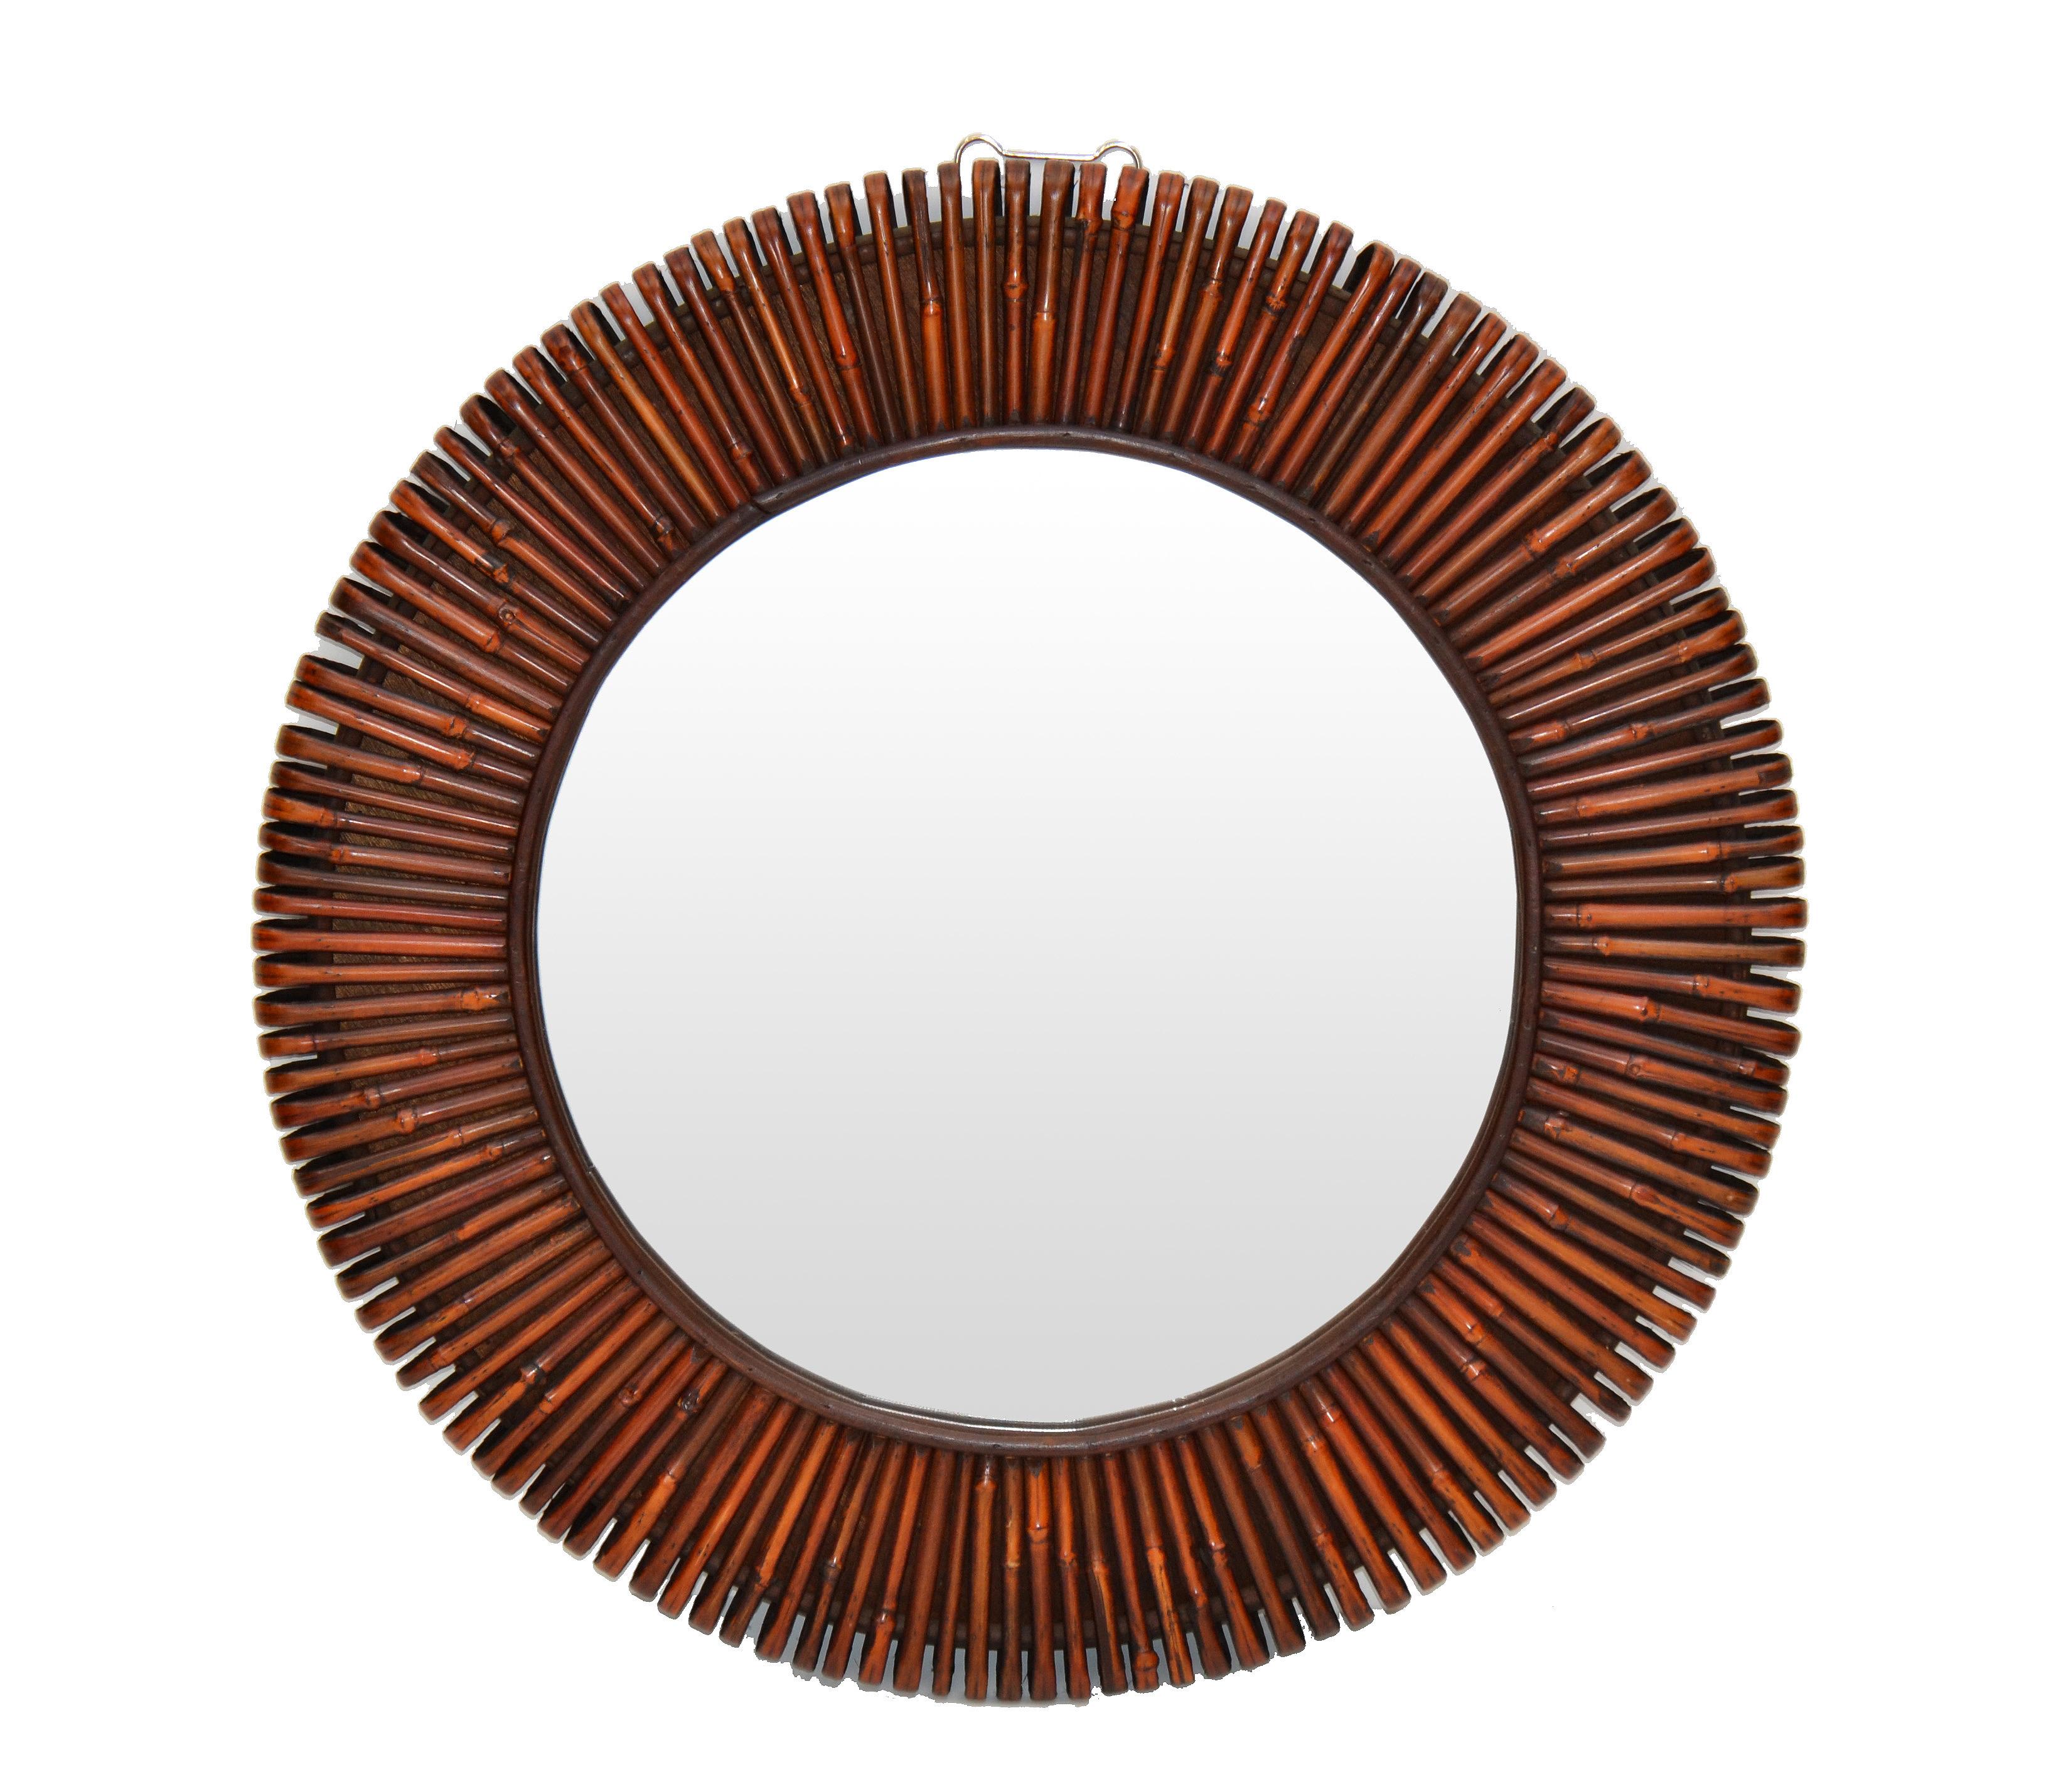 Beautiful modern round handcrafted bent rattan wall mirror.
The back is solid wood with a secure hanging construction. 
This mirror is super fashionable.
Mirror size: 16.25 inches diameter.